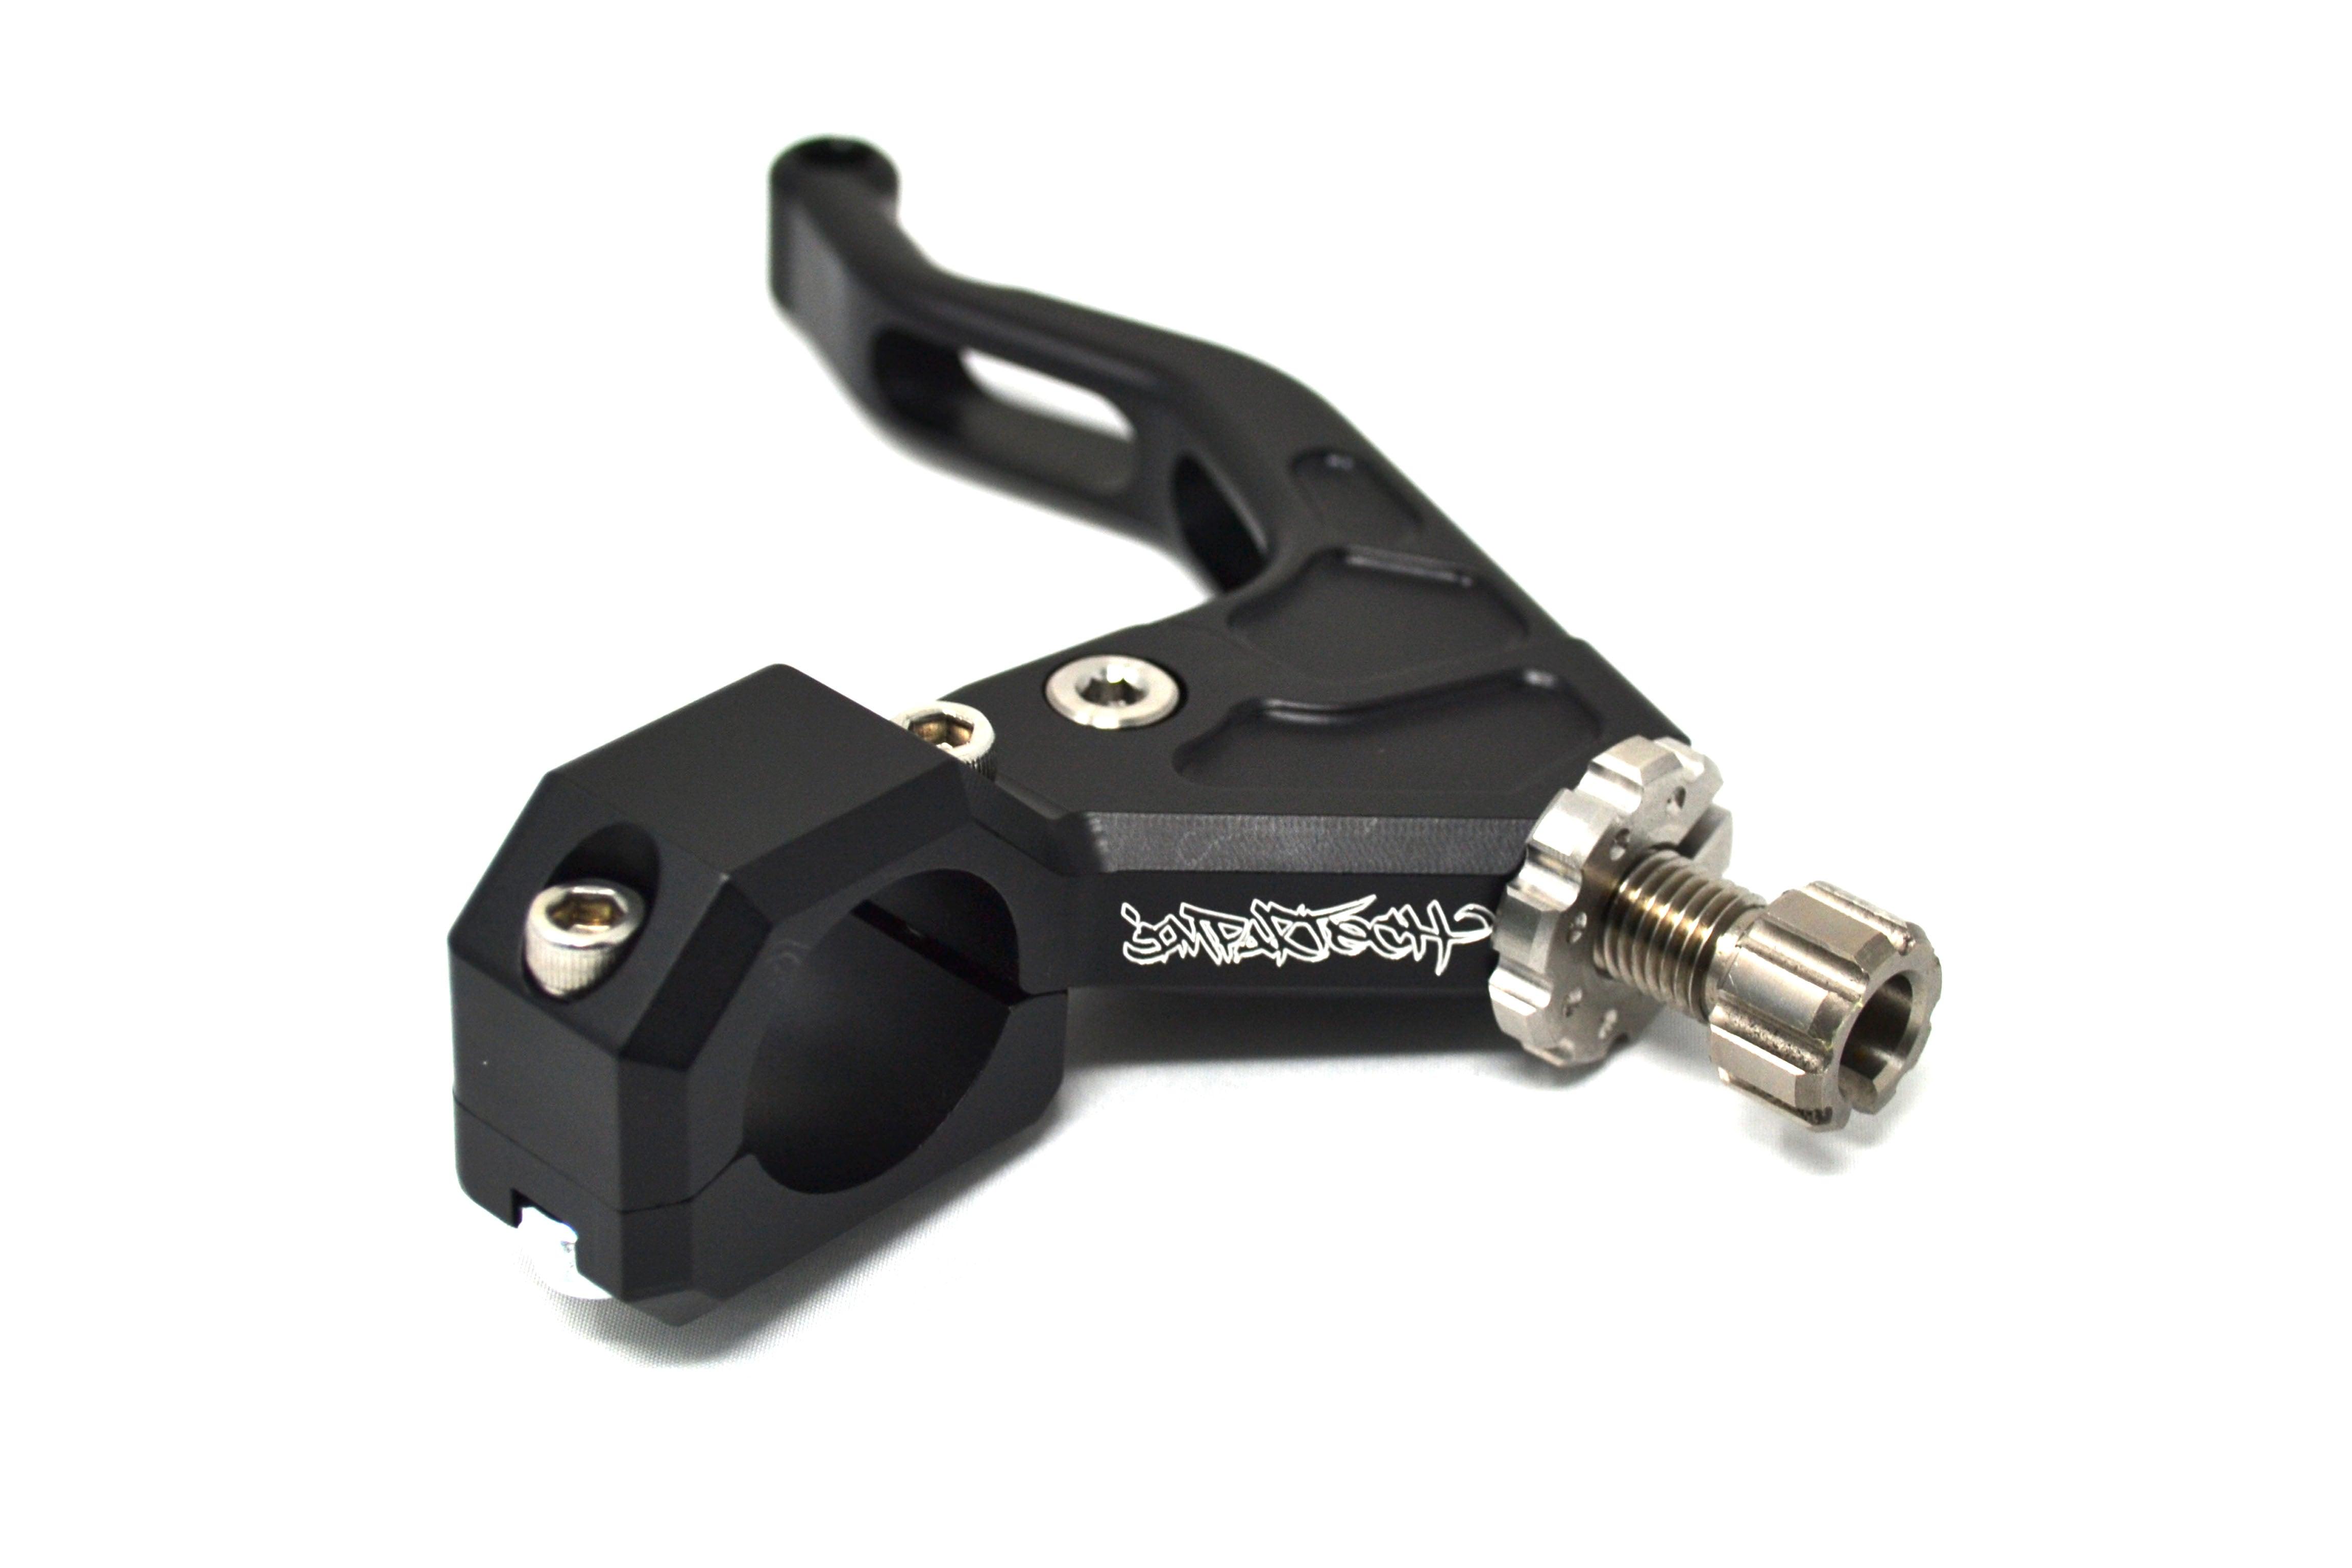 Harley Clutch Lever - ImpakTech